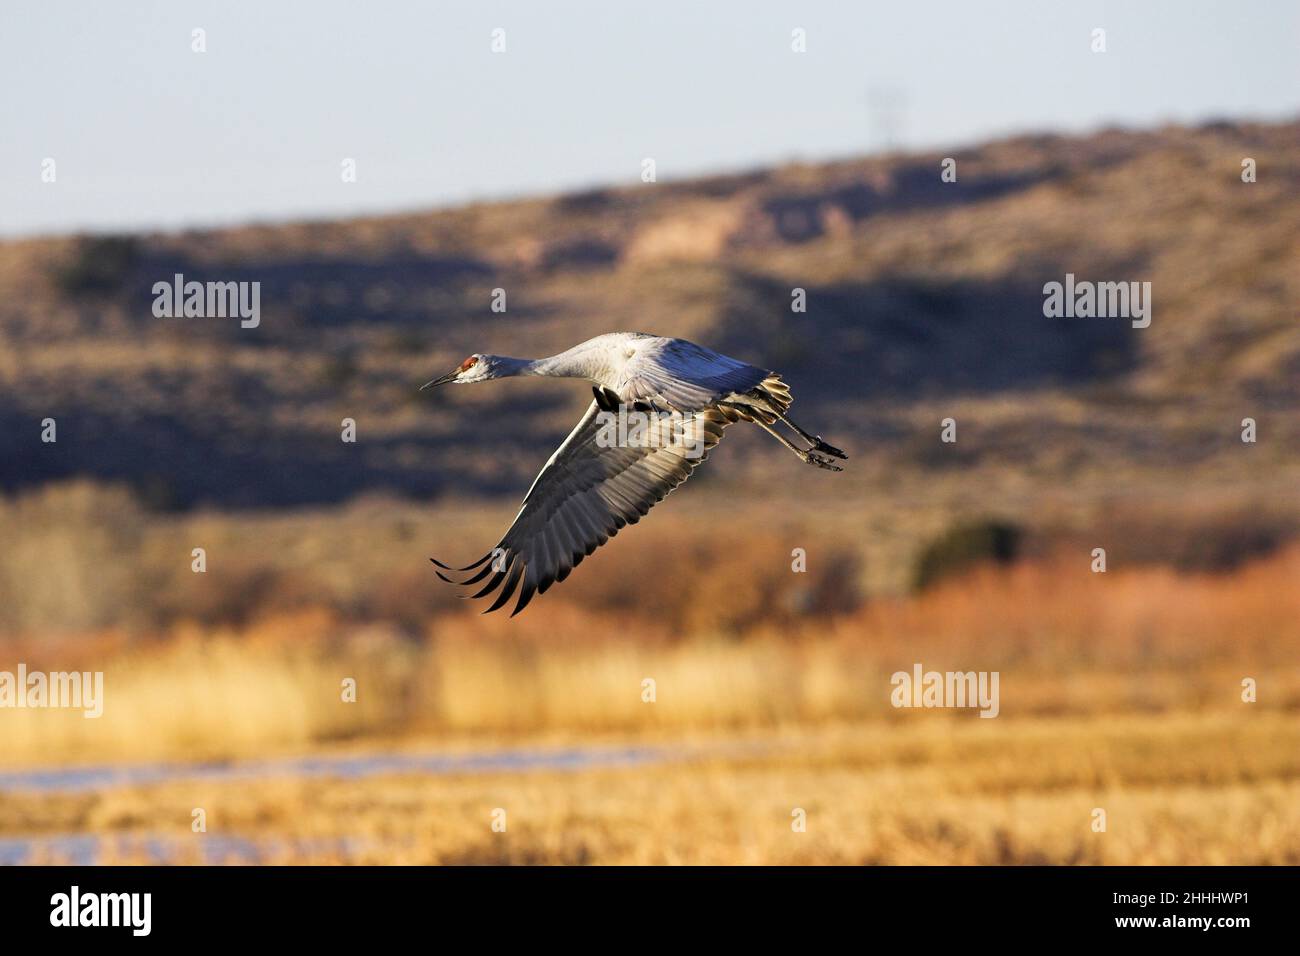 Sandhill crane Grus canadensis in flight with trees and hillside beyond, Bosque del Apache National Wildlife Refuge New Mexico USA Stock Photo